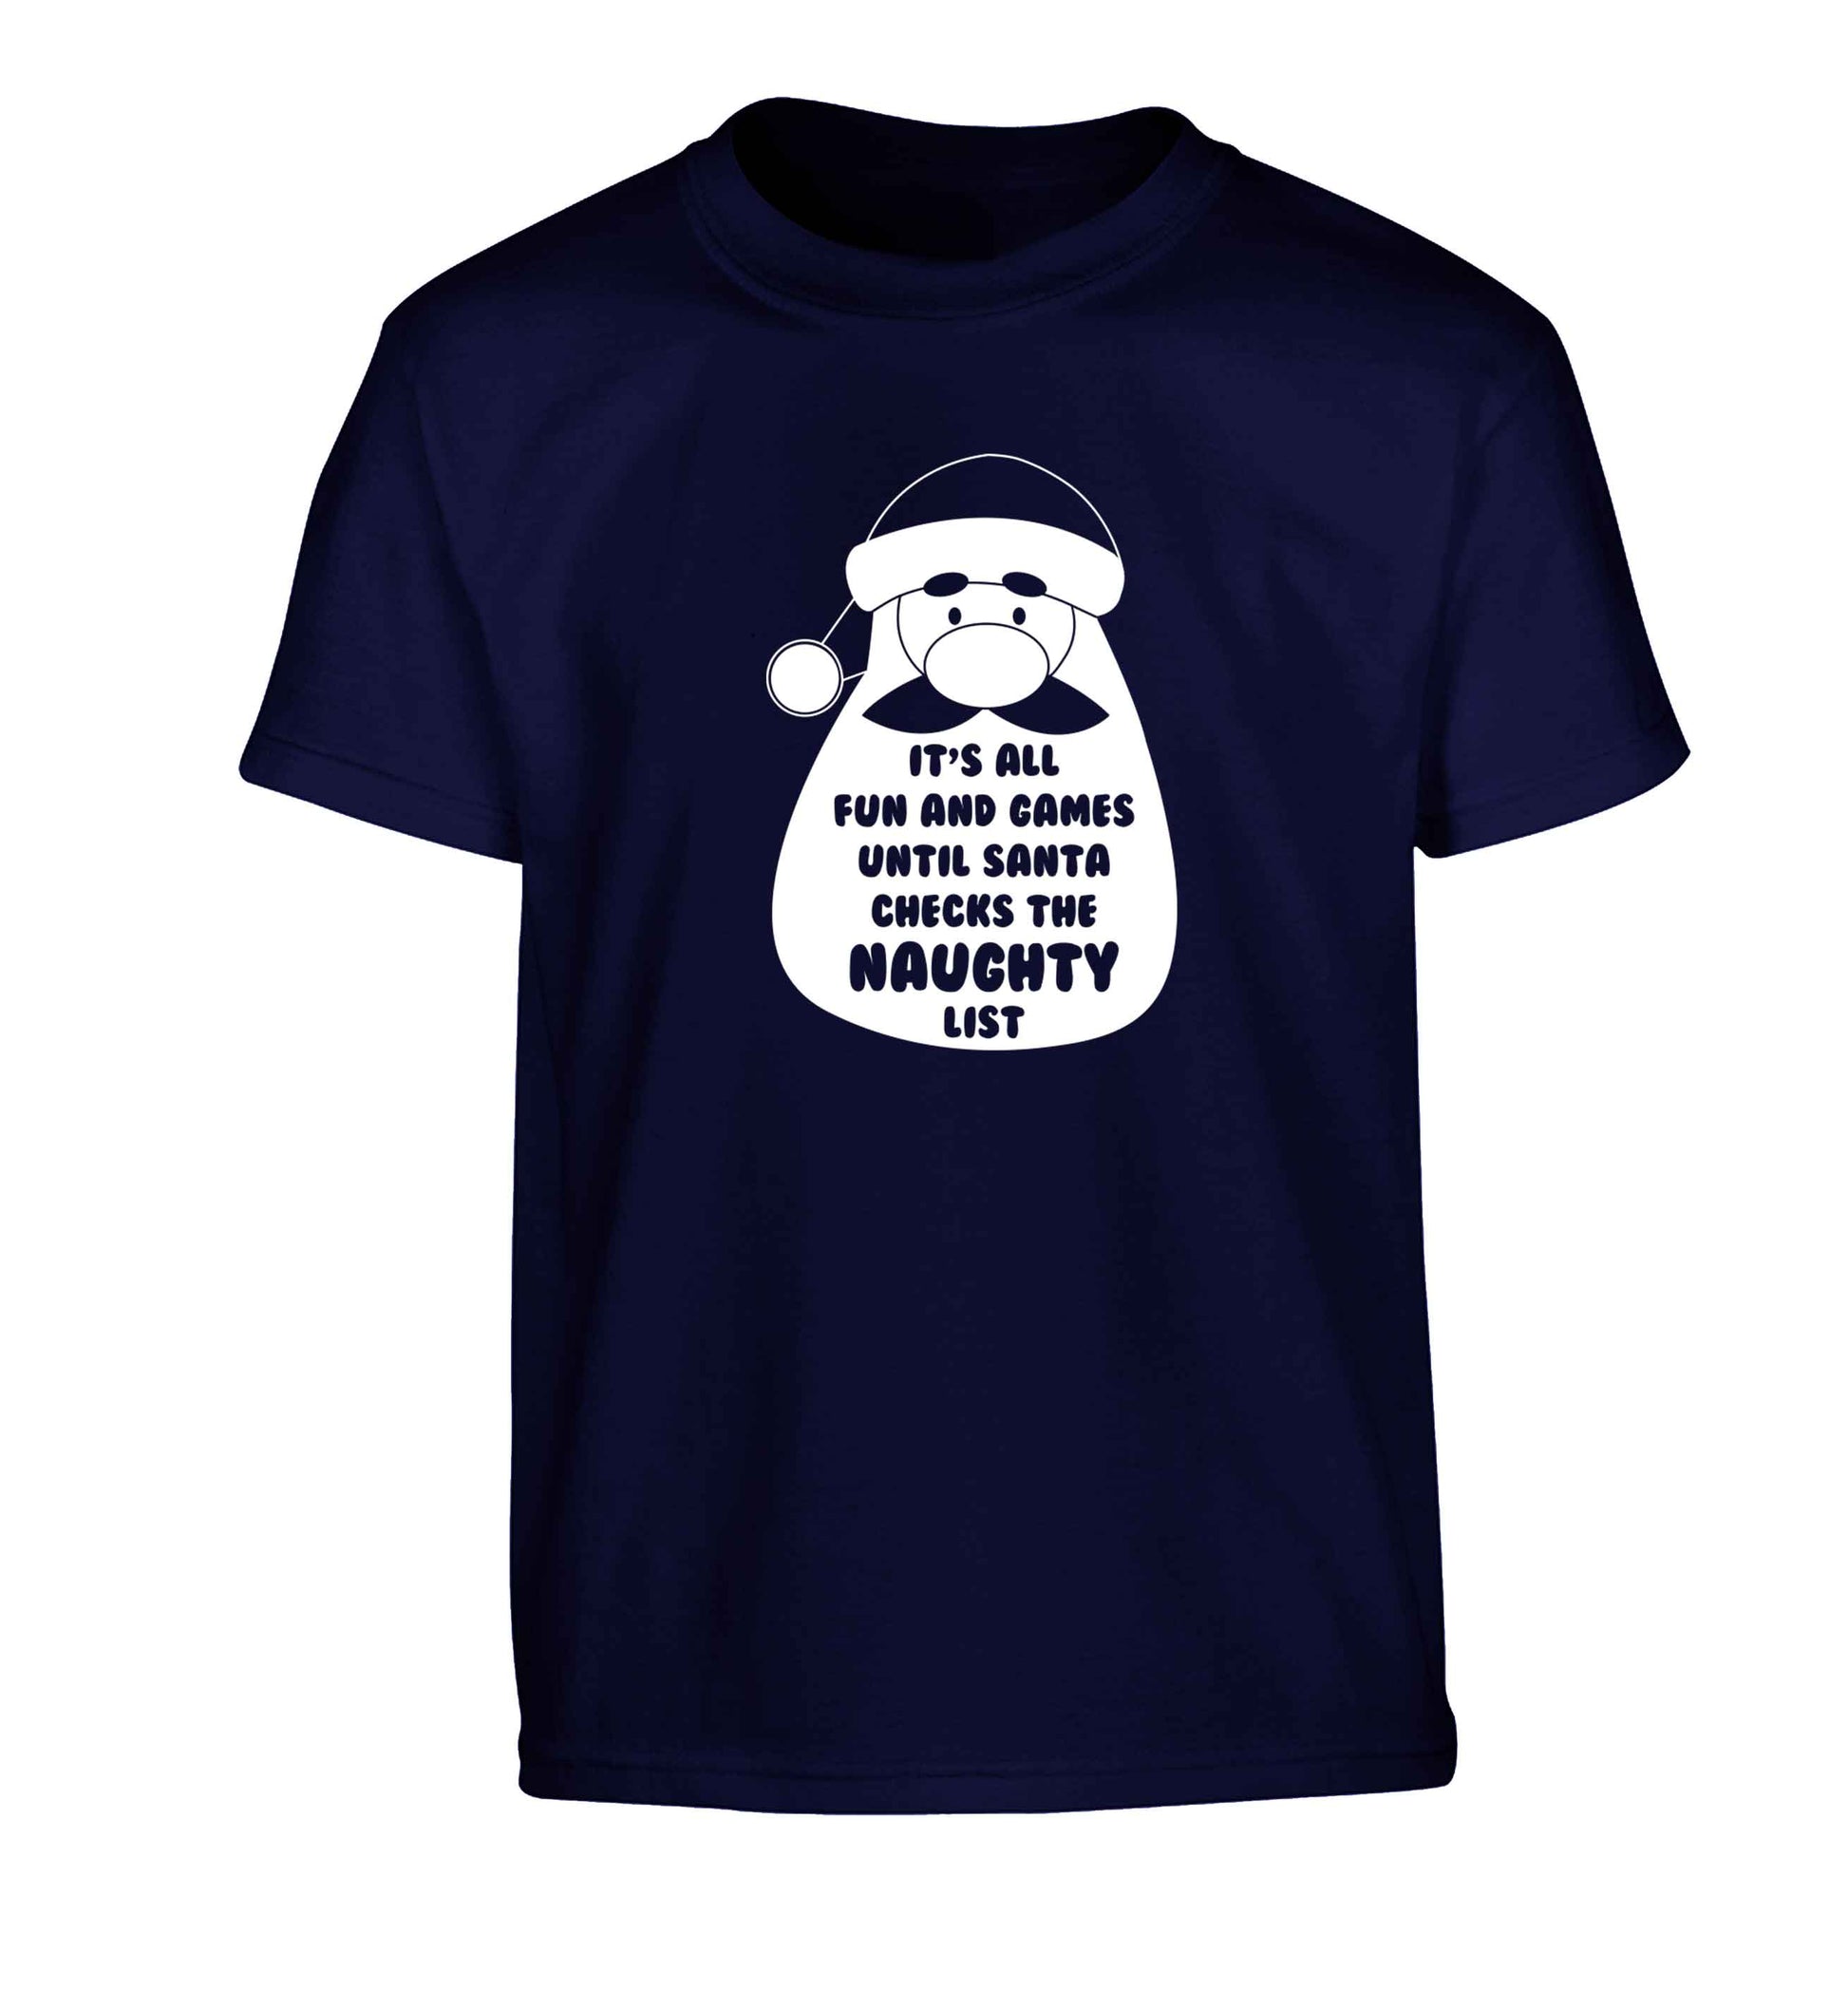 It's all fun and games until Santa checks the naughty list Children's navy Tshirt 12-13 Years